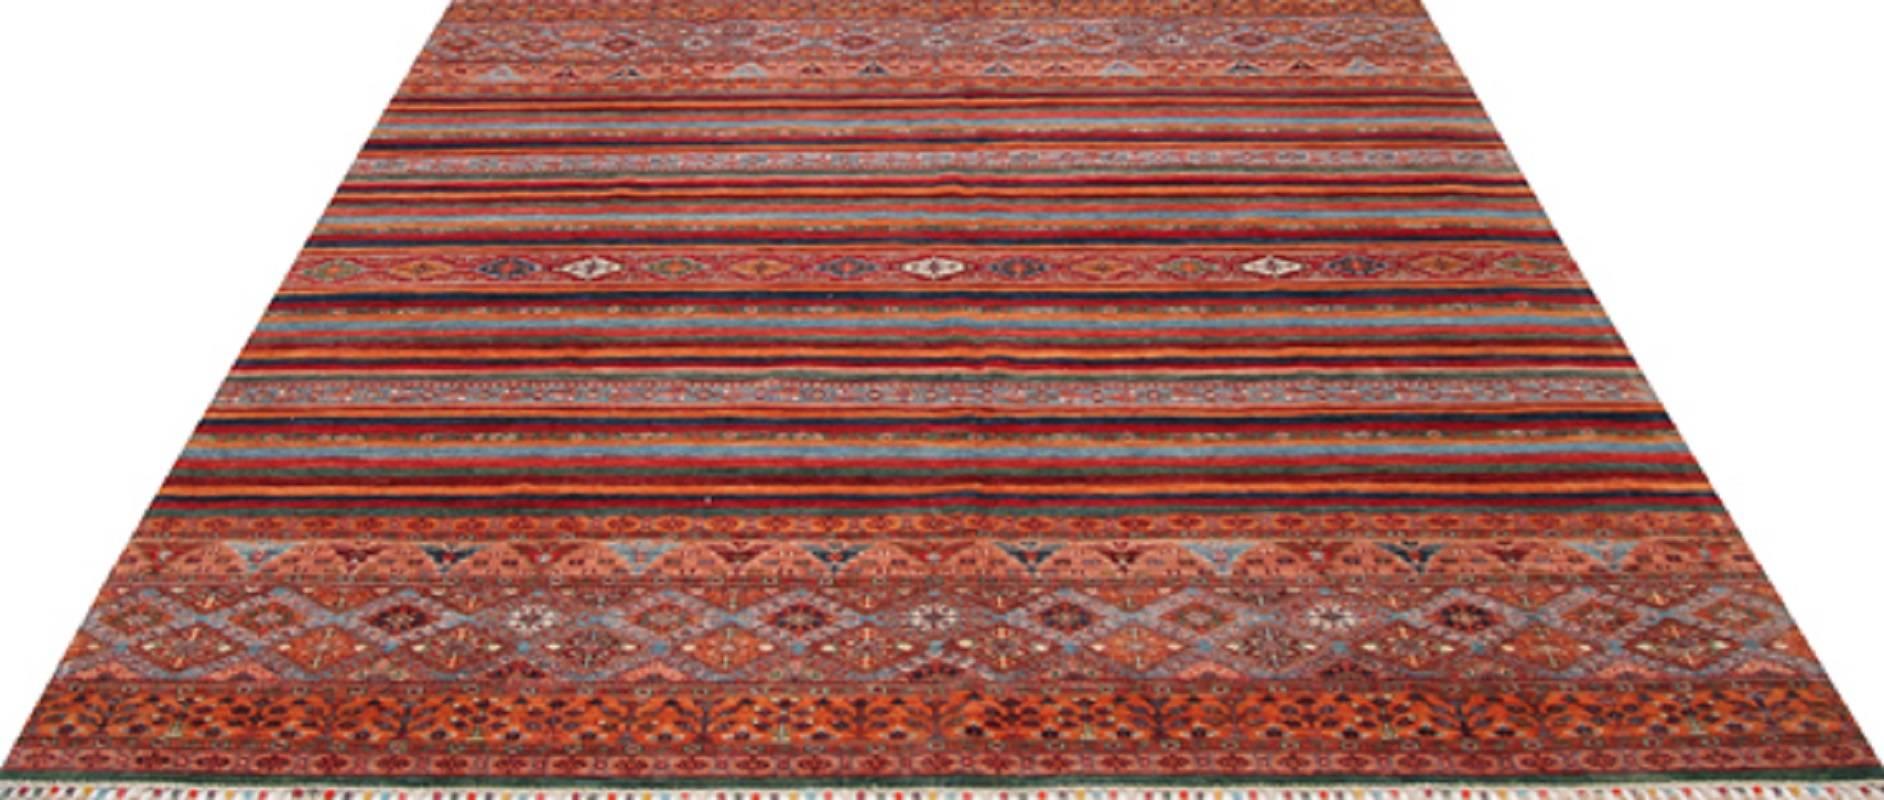 Hand-Woven Modern Handwoven Turkmenistan Rug with Geometric Motif For Sale